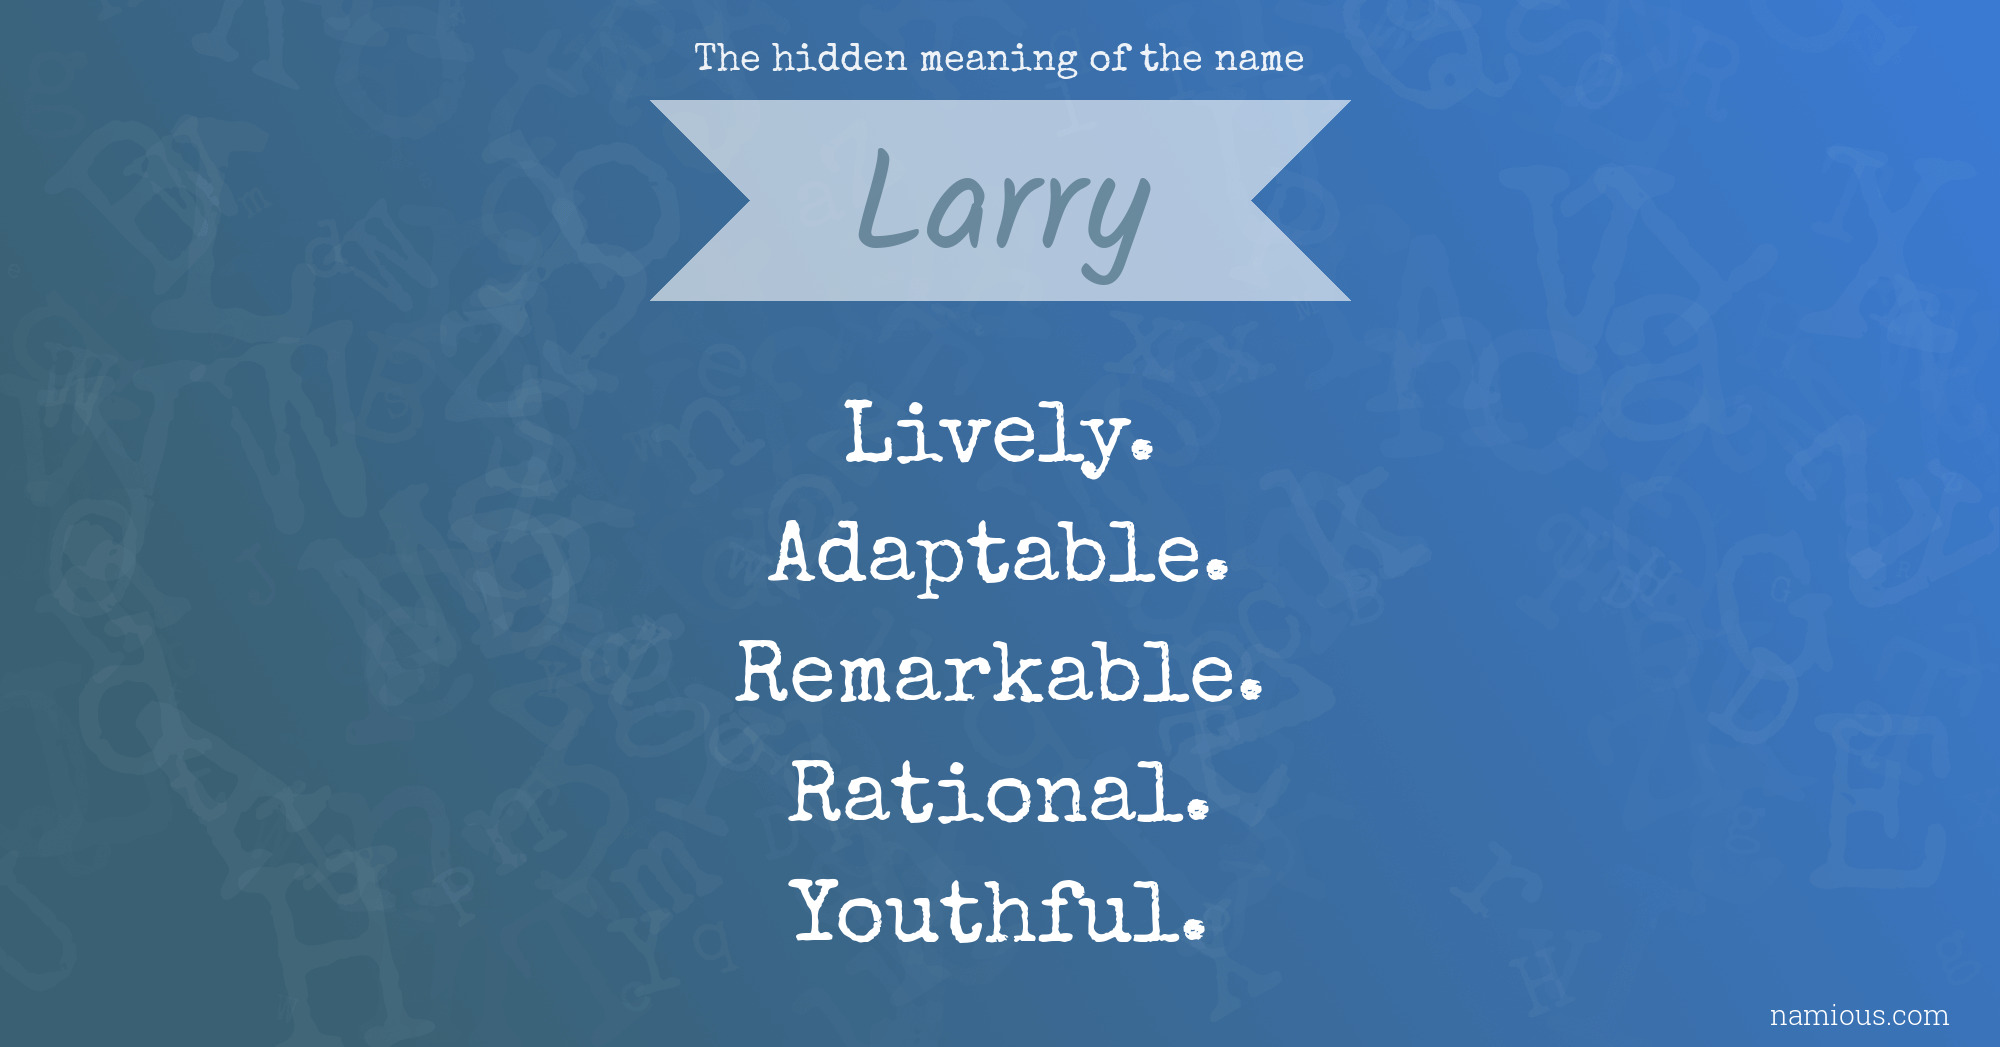 The hidden meaning of the name Larry